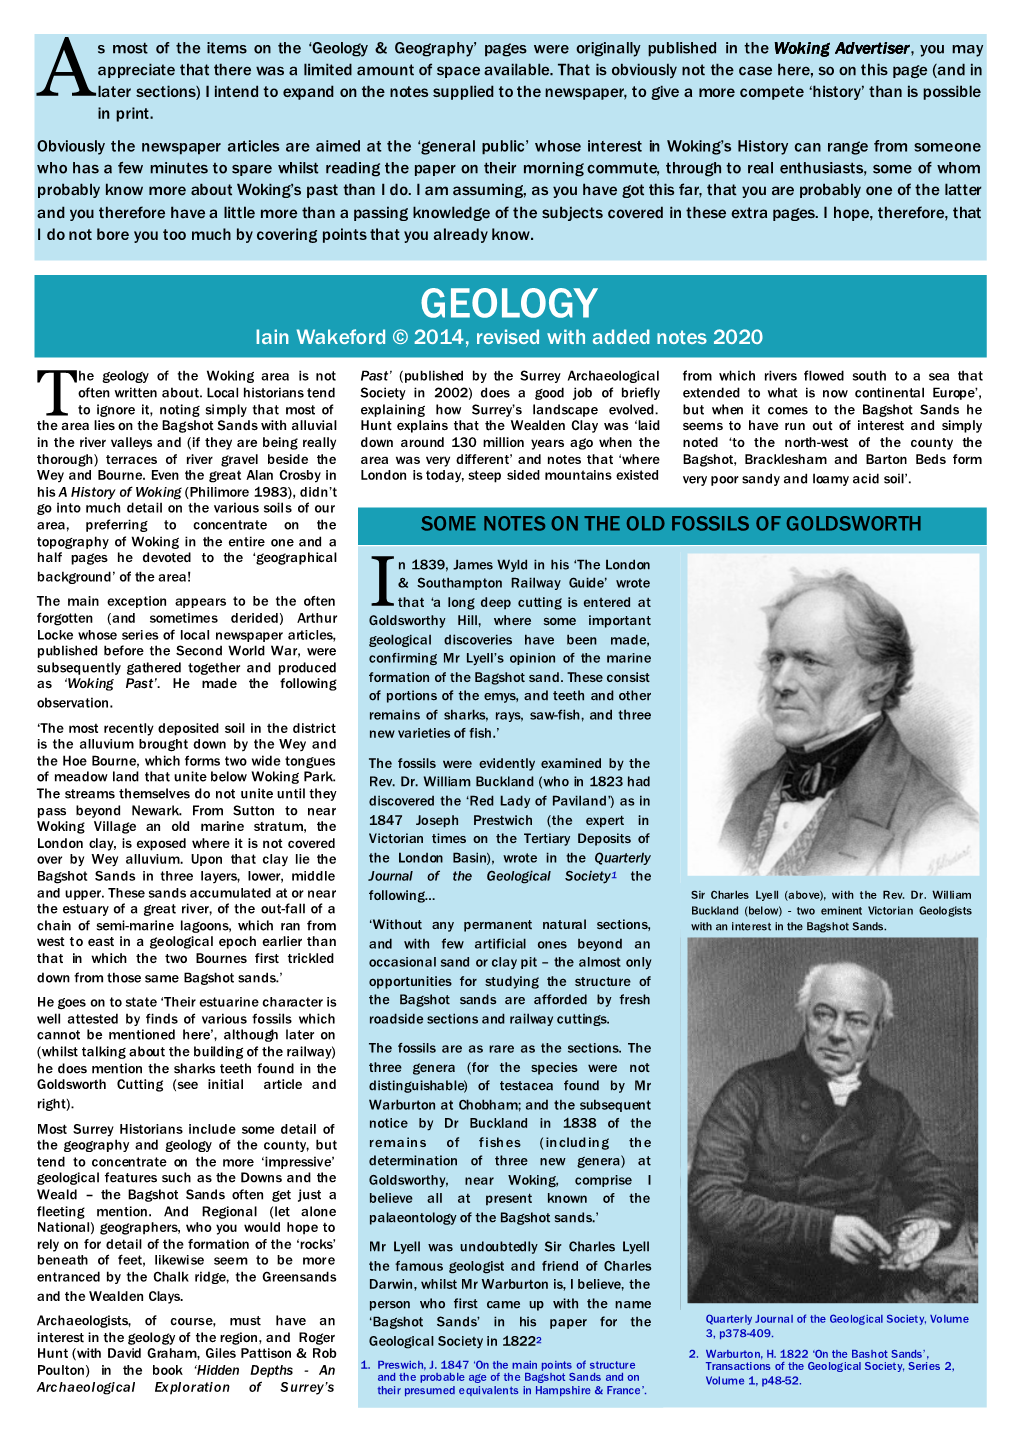 Geology & Geography’ Pages Were Originally Published in the Woking Advertiser , You May Appreciate That There Was a Limited Amount of Space Available